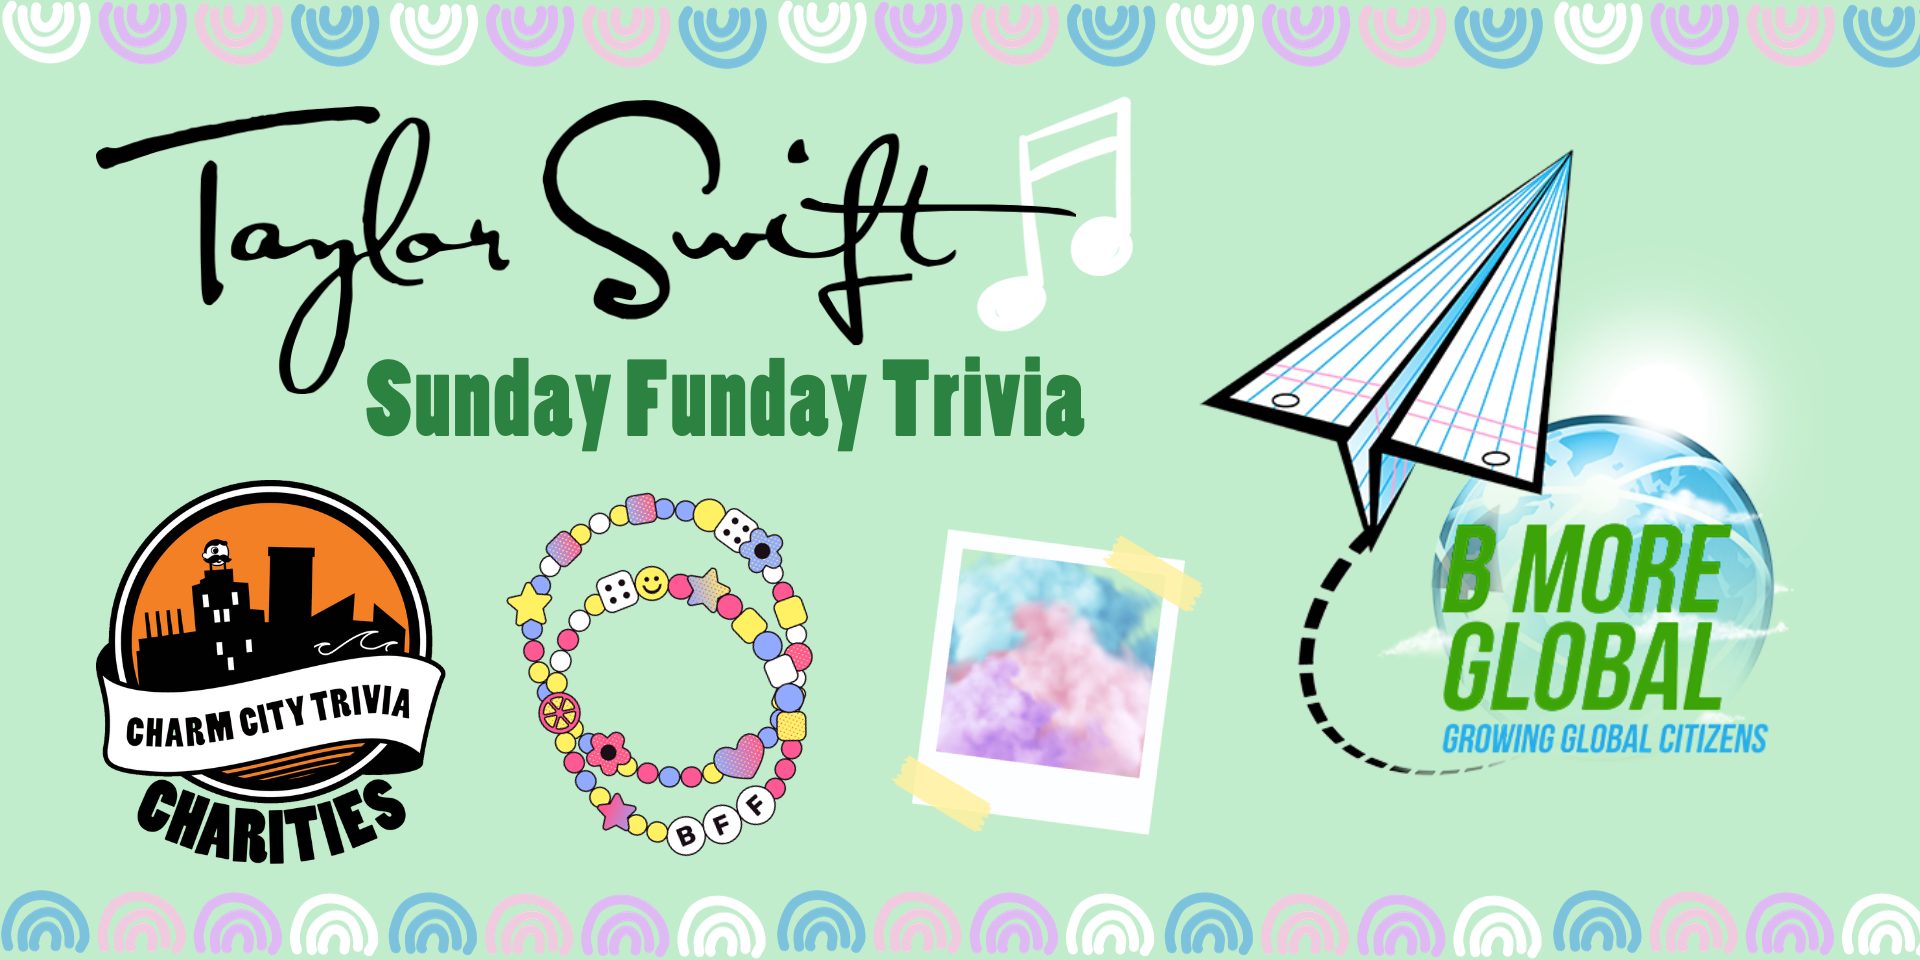 a light green background with a colorful border, the Charm City Trivia Charities logo, the B More Global logo, friendship bracelets, a polaroid photo of colorful clouds, Taylor Swift's name, white music notes, and dark green text. The text reads: Sunday Funday Trivia